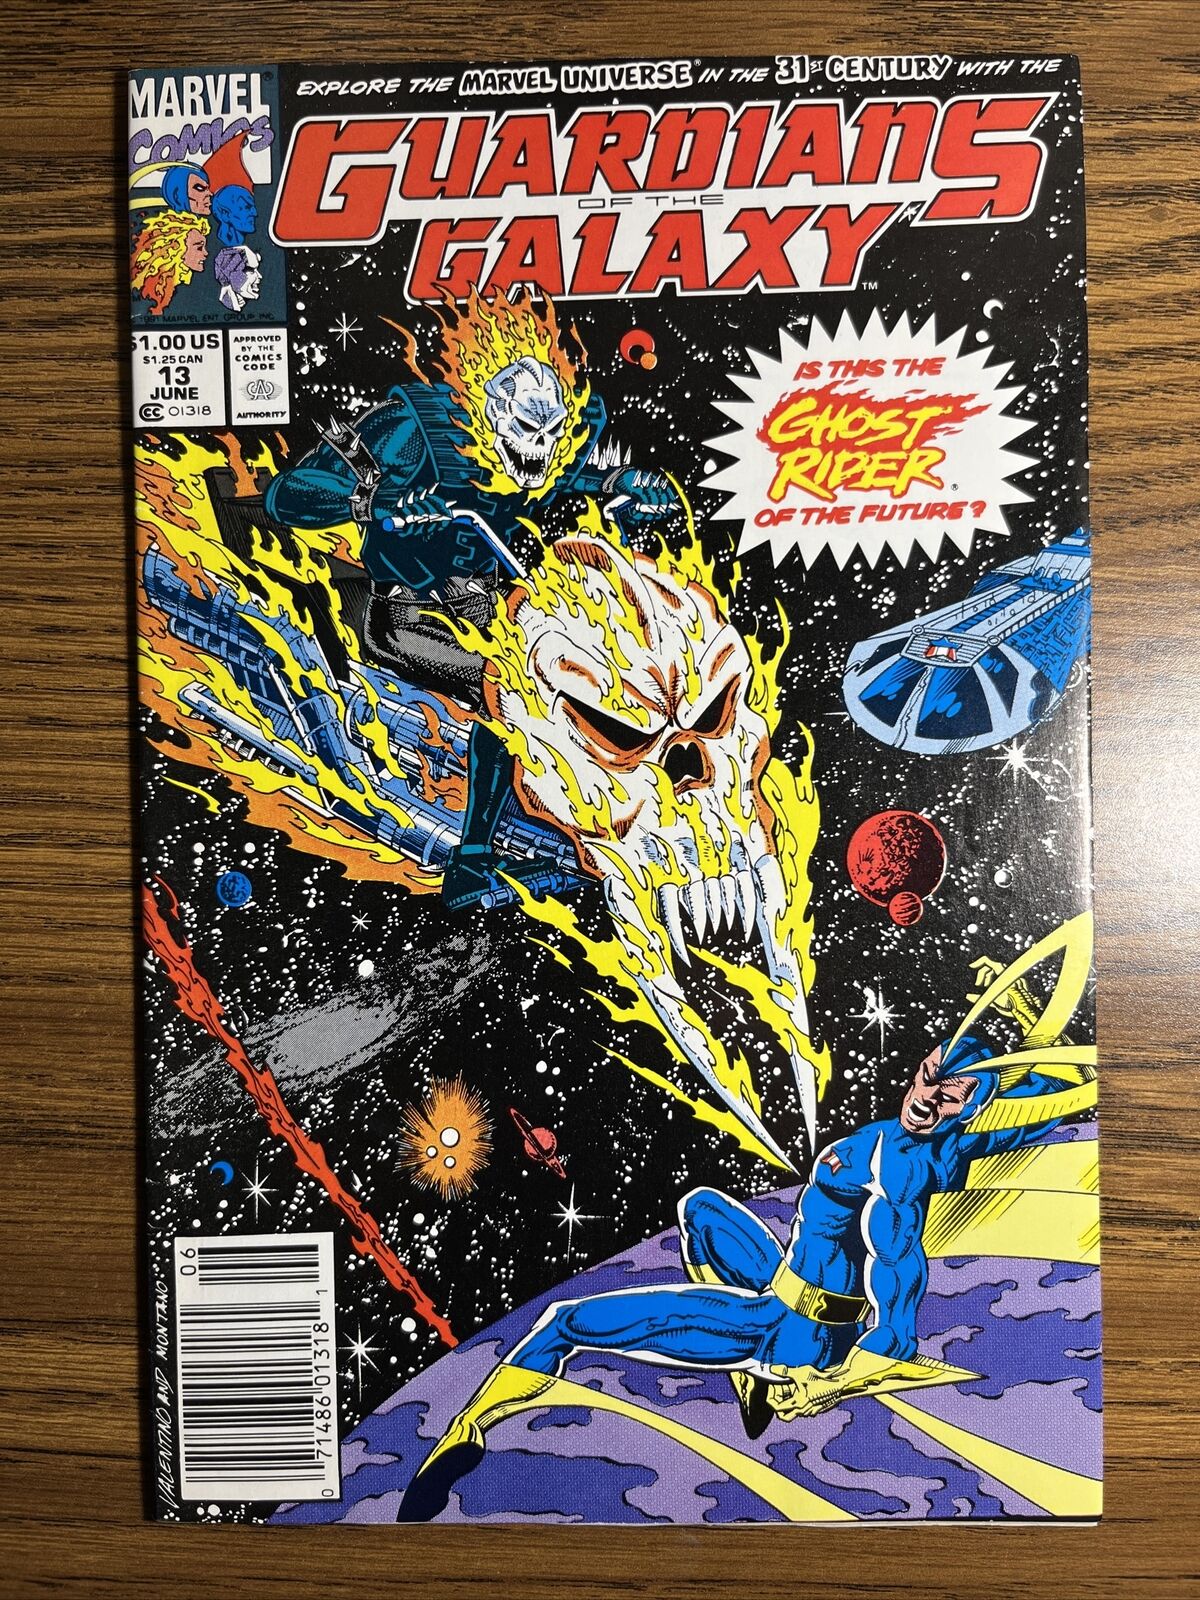 GUARDIANS OF THE GALAXY 13 1ST APP FUTURE GHOST RIDER SPIRIT OF VENGEANCE 1991